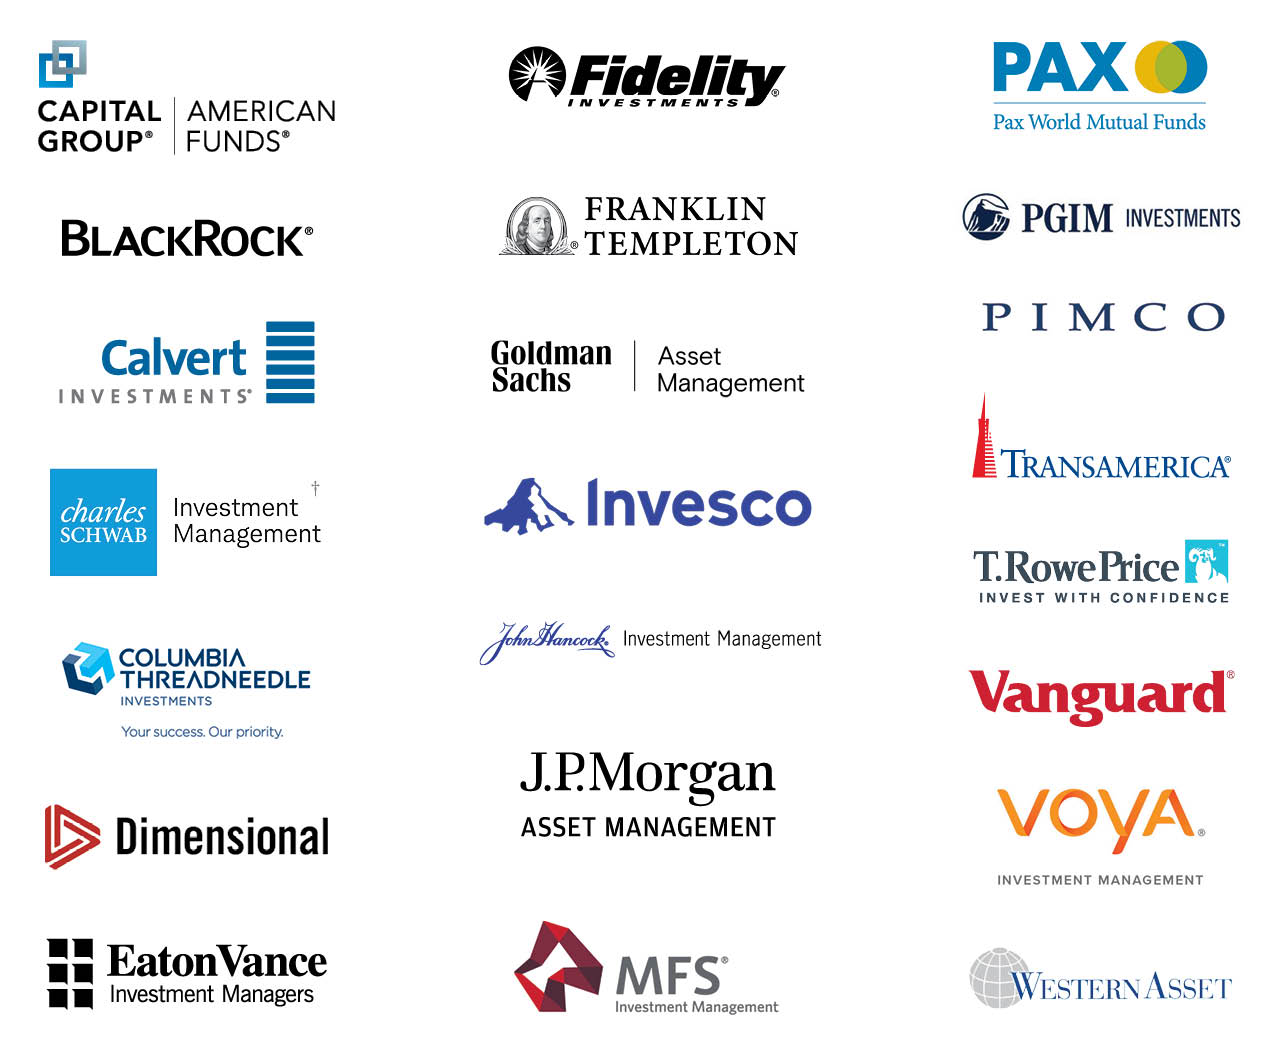 Image shows the company logos for the funds from well-respected investment managers. The company logos include: Capital Group/American Funds, BlackRock, Calvert  Investments, Charles Schwab Investment Management, Columbia Threadneedle,  Dimensional, Eaton  Vance Investment Managers, Fidelity,  Franklin Templeton, Goldman Sachs Asset Management, Invesco, John  Hancock Investments, J.P. Morgan Asset Management, MFS Investment  Management, Pax  World Mutual Funds, PGIM Investments, PIMCO, Transamerica, T. Rowe Price, Vanguard,  Voya Investment Management, Western Asset